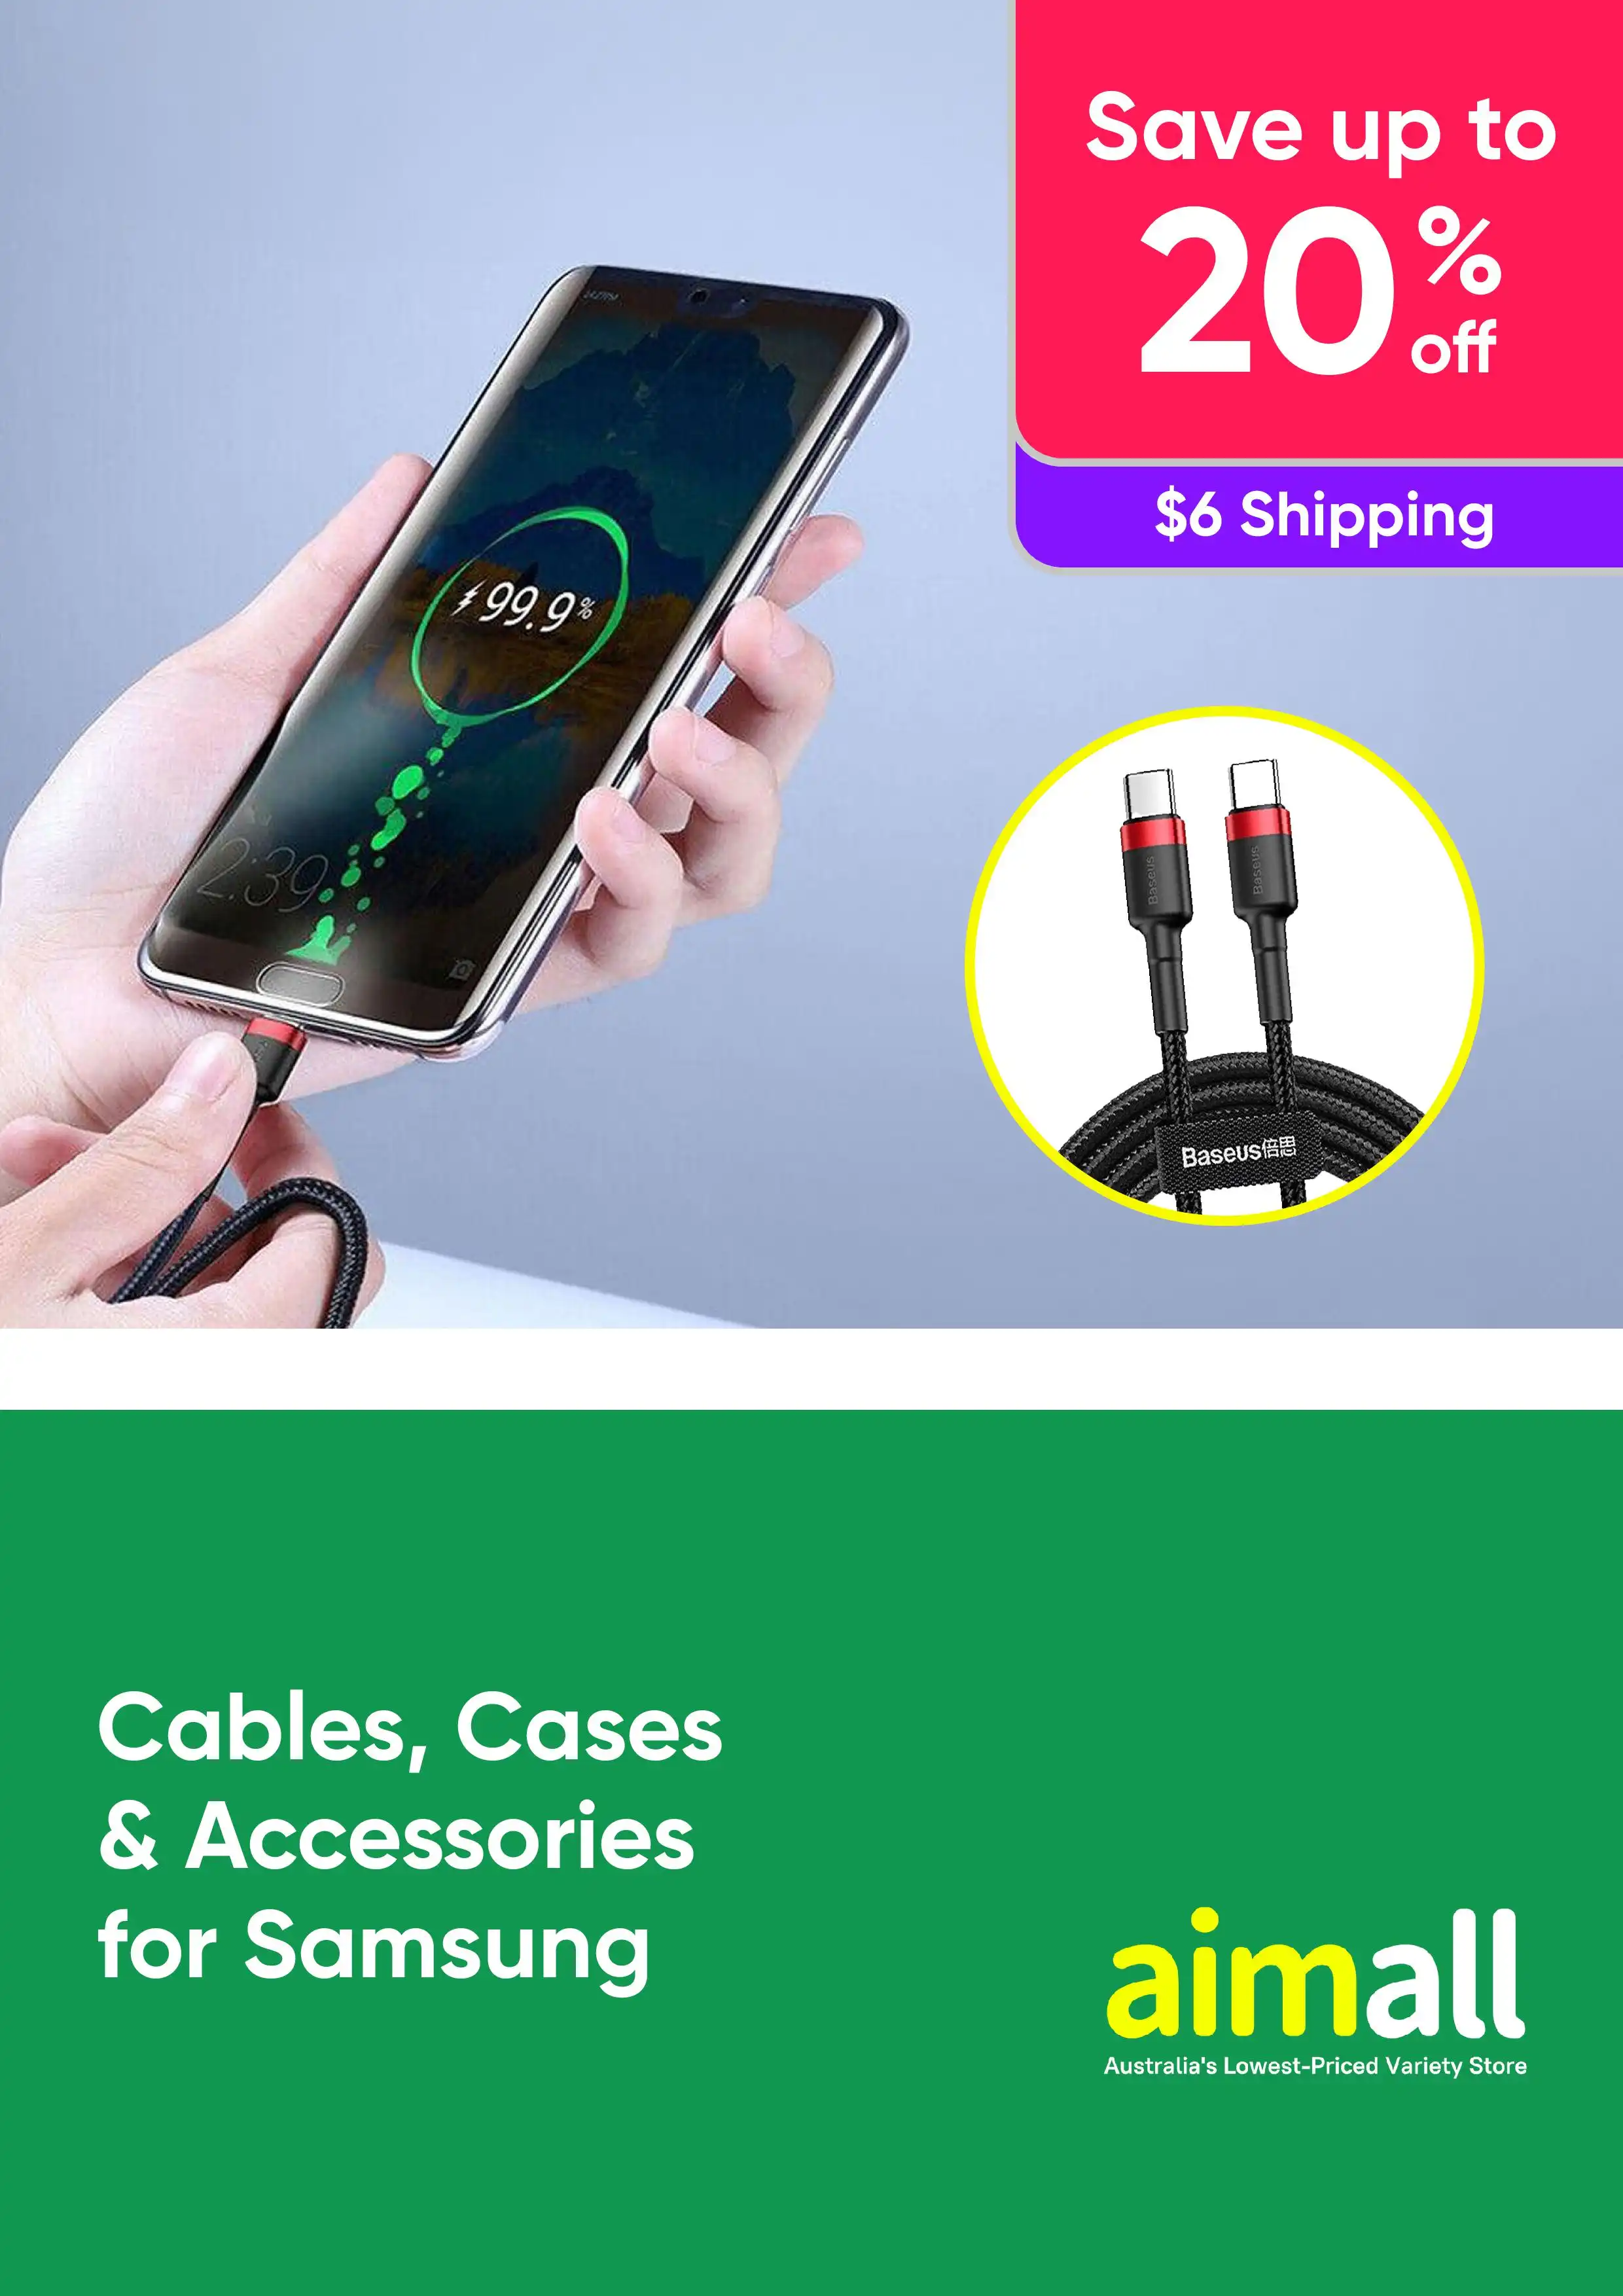 Up to 20% off cables, cases & accessories for Samsung